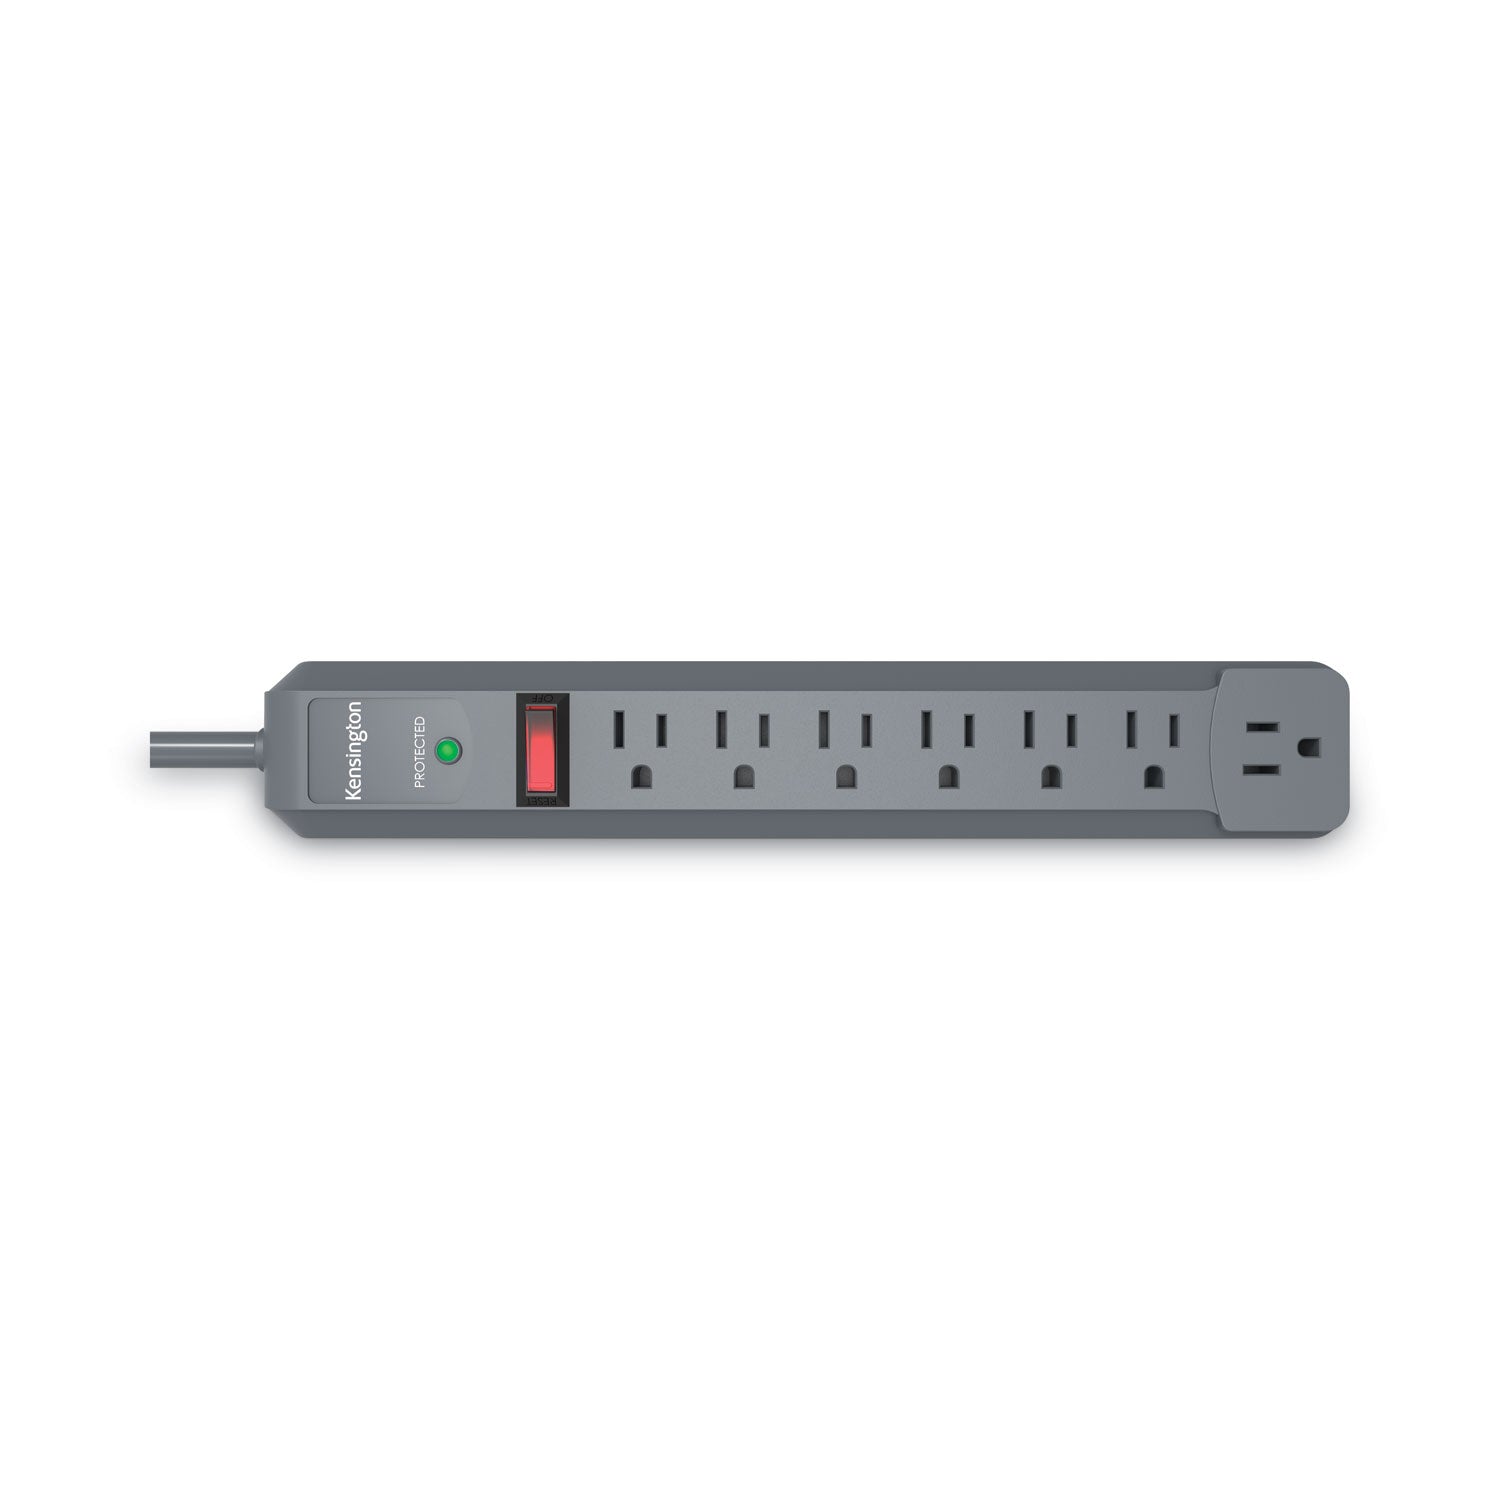 Guardian Premium Surge Protector, 7 AC Outlets, 6 ft Cord, 540 J, Gray - 